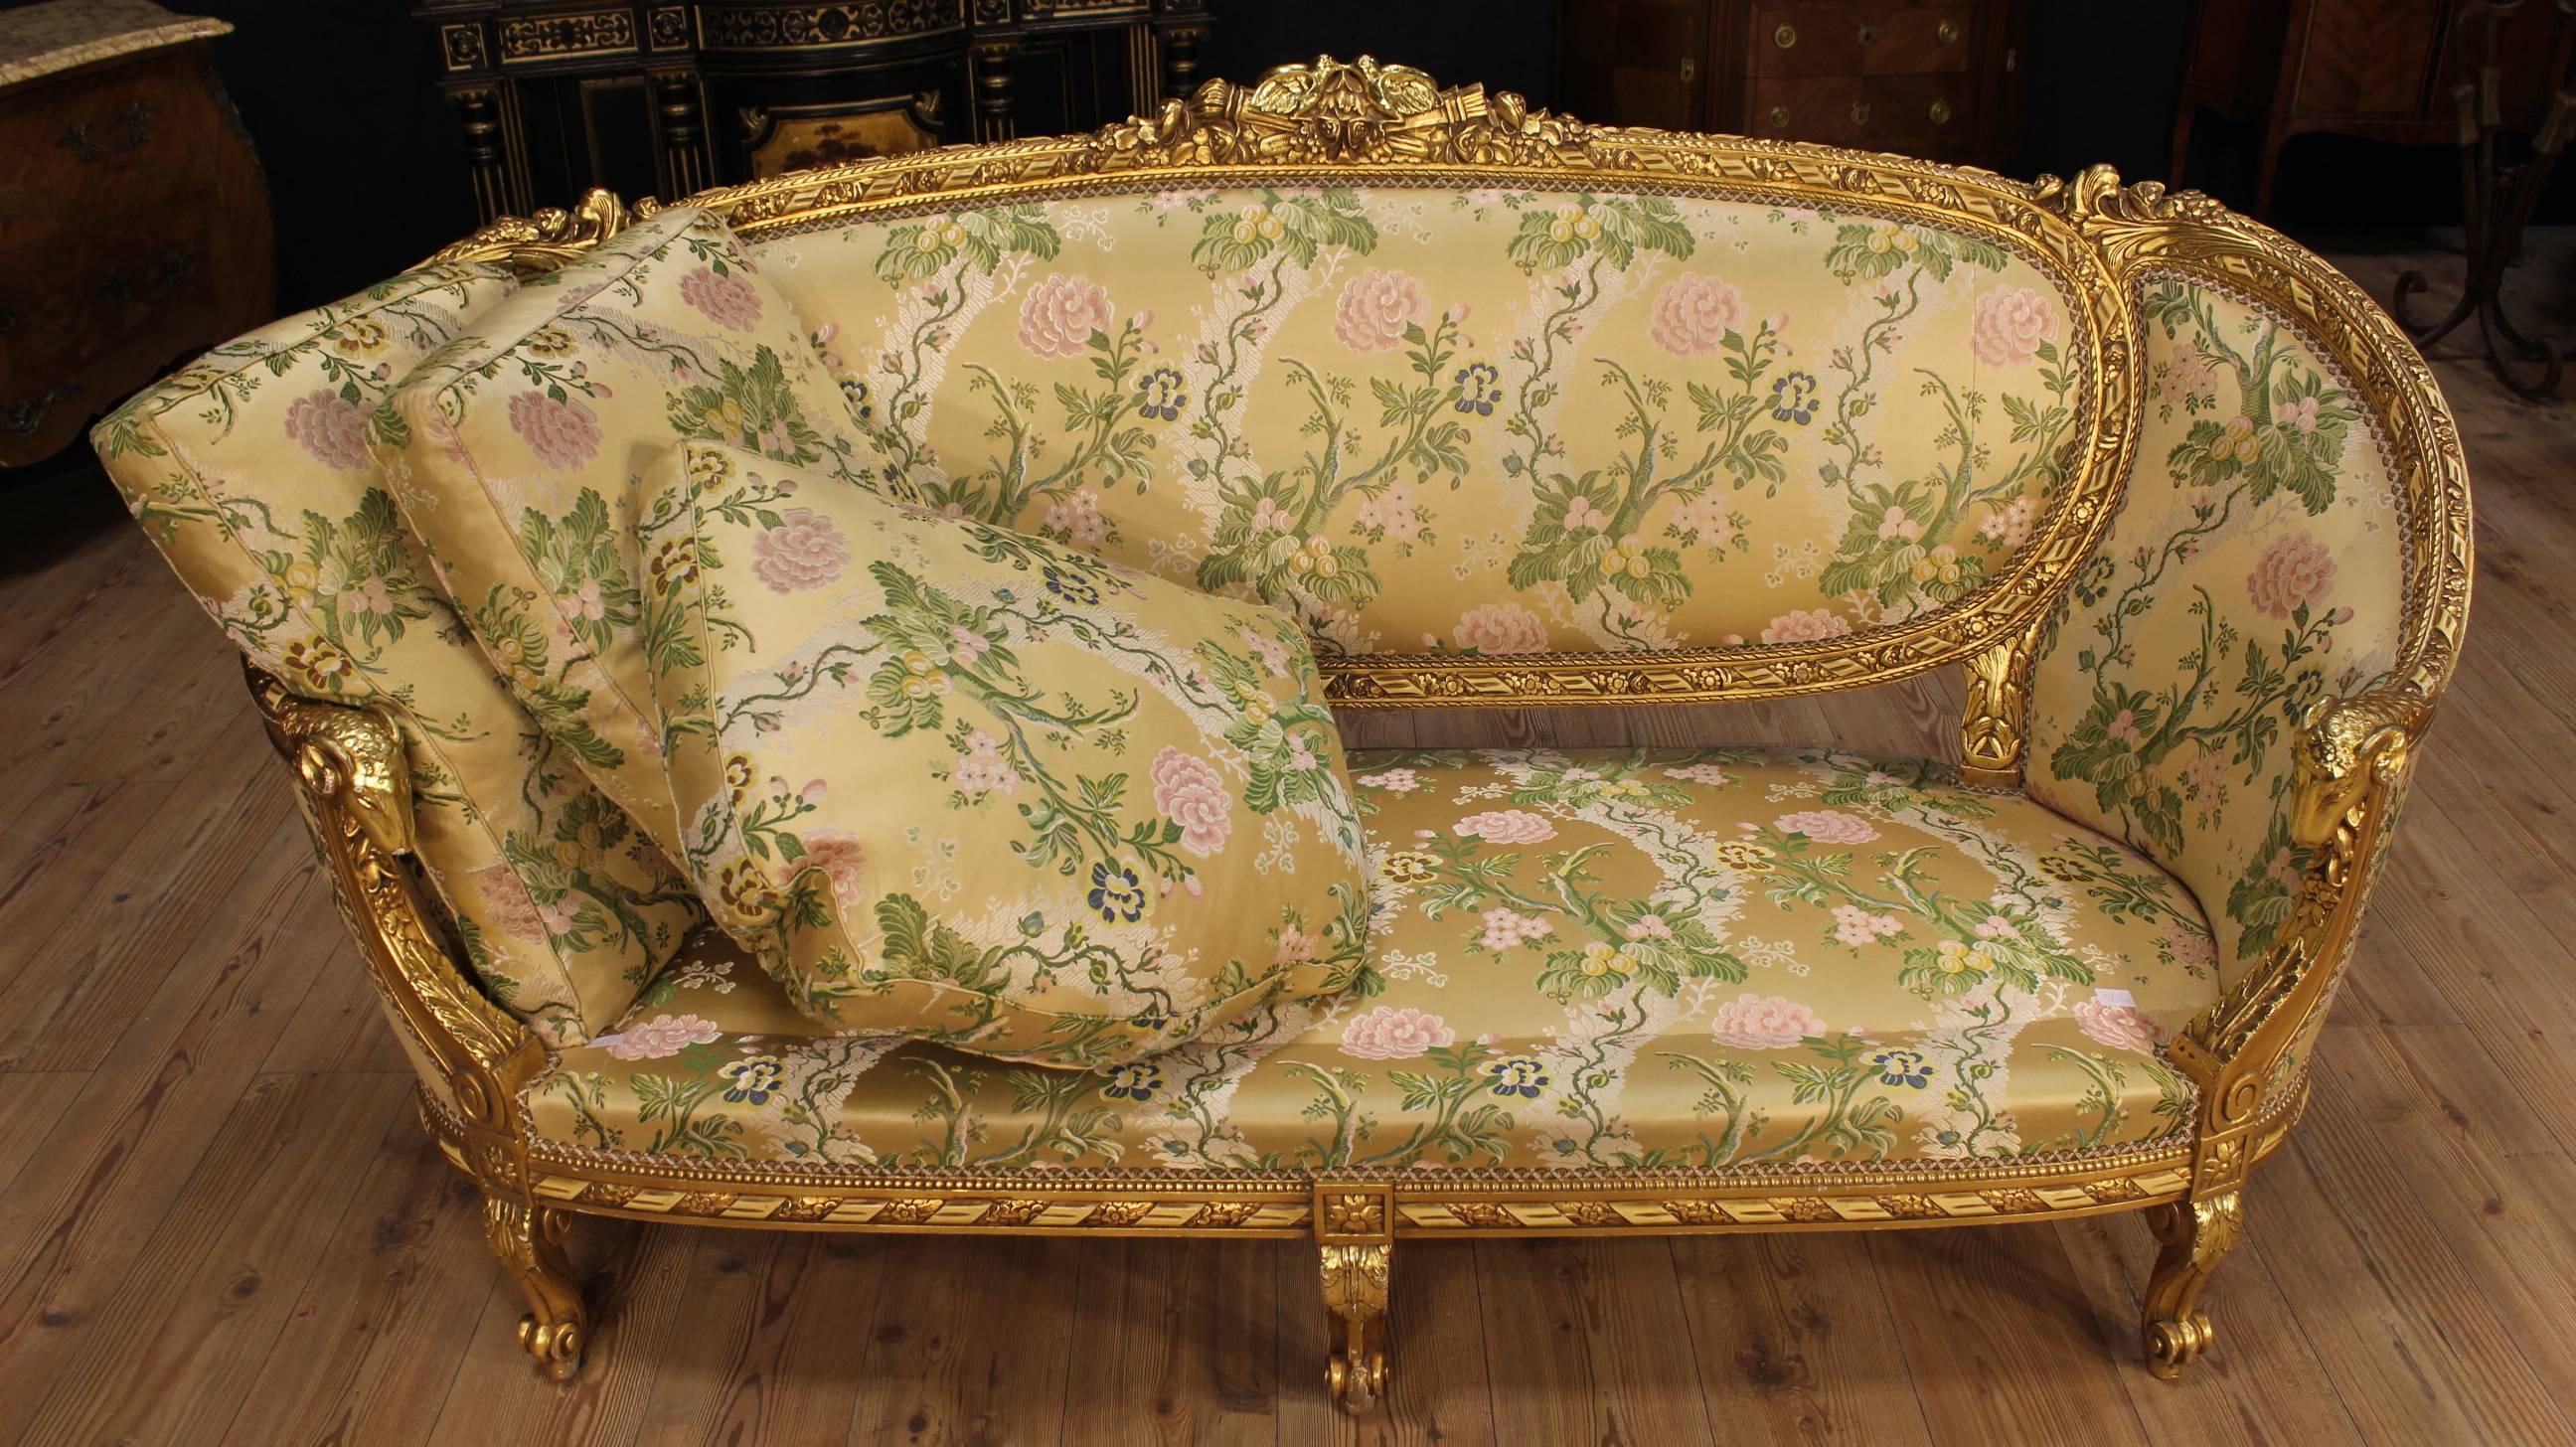 20th Century Golden Sofa with Floral Fabric 2